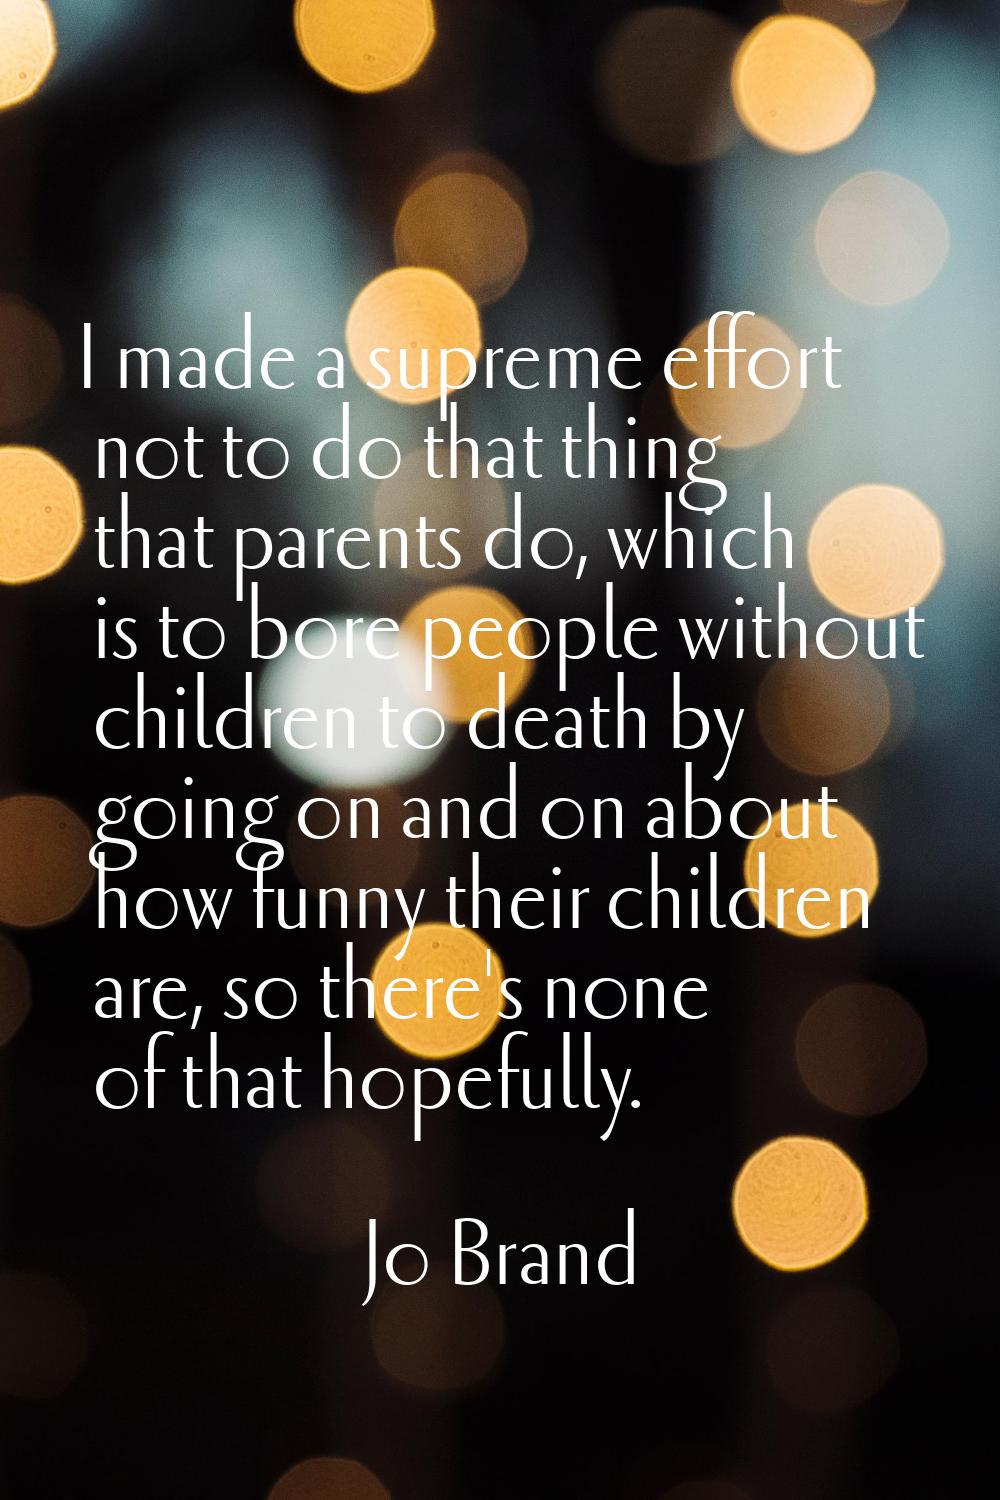 I made a supreme effort not to do that thing that parents do, which is to bore people without child